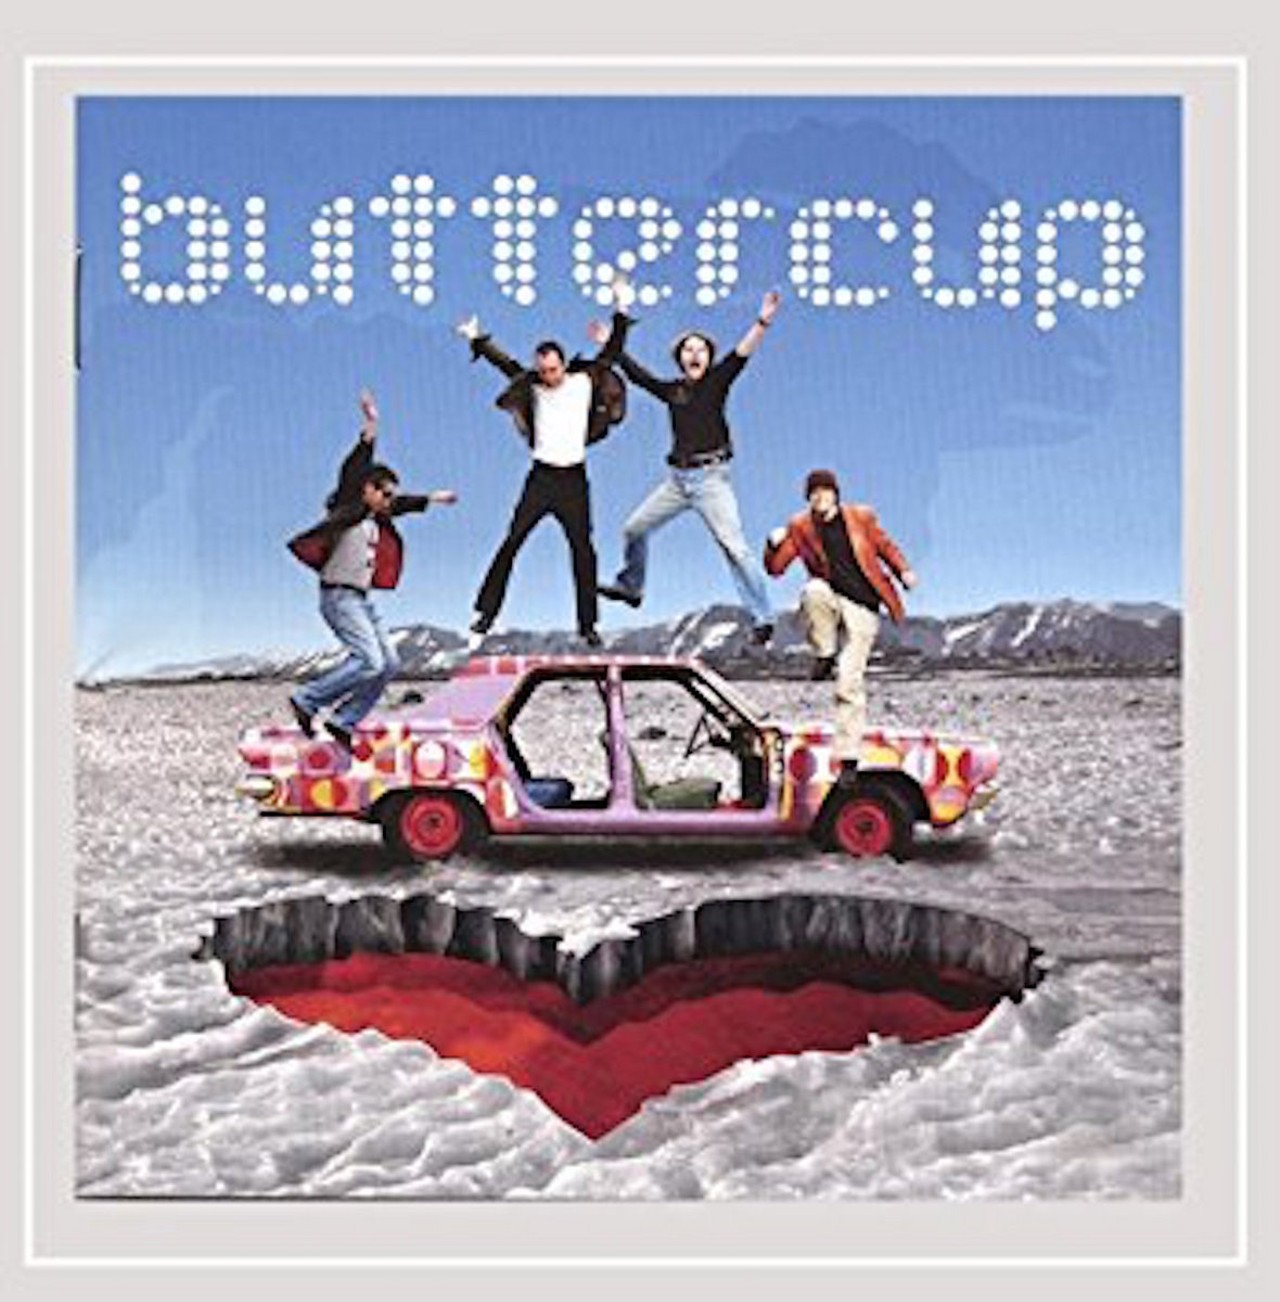 Buttercup: "Hot Love"
This quirky yet accessible San Antonio band recorded much of its sonic output in the Alamo City, but this classics-packed album is arguably its most memorable. Essential listening for fans of arty pop-rock.
Photo via Bedlamb Records